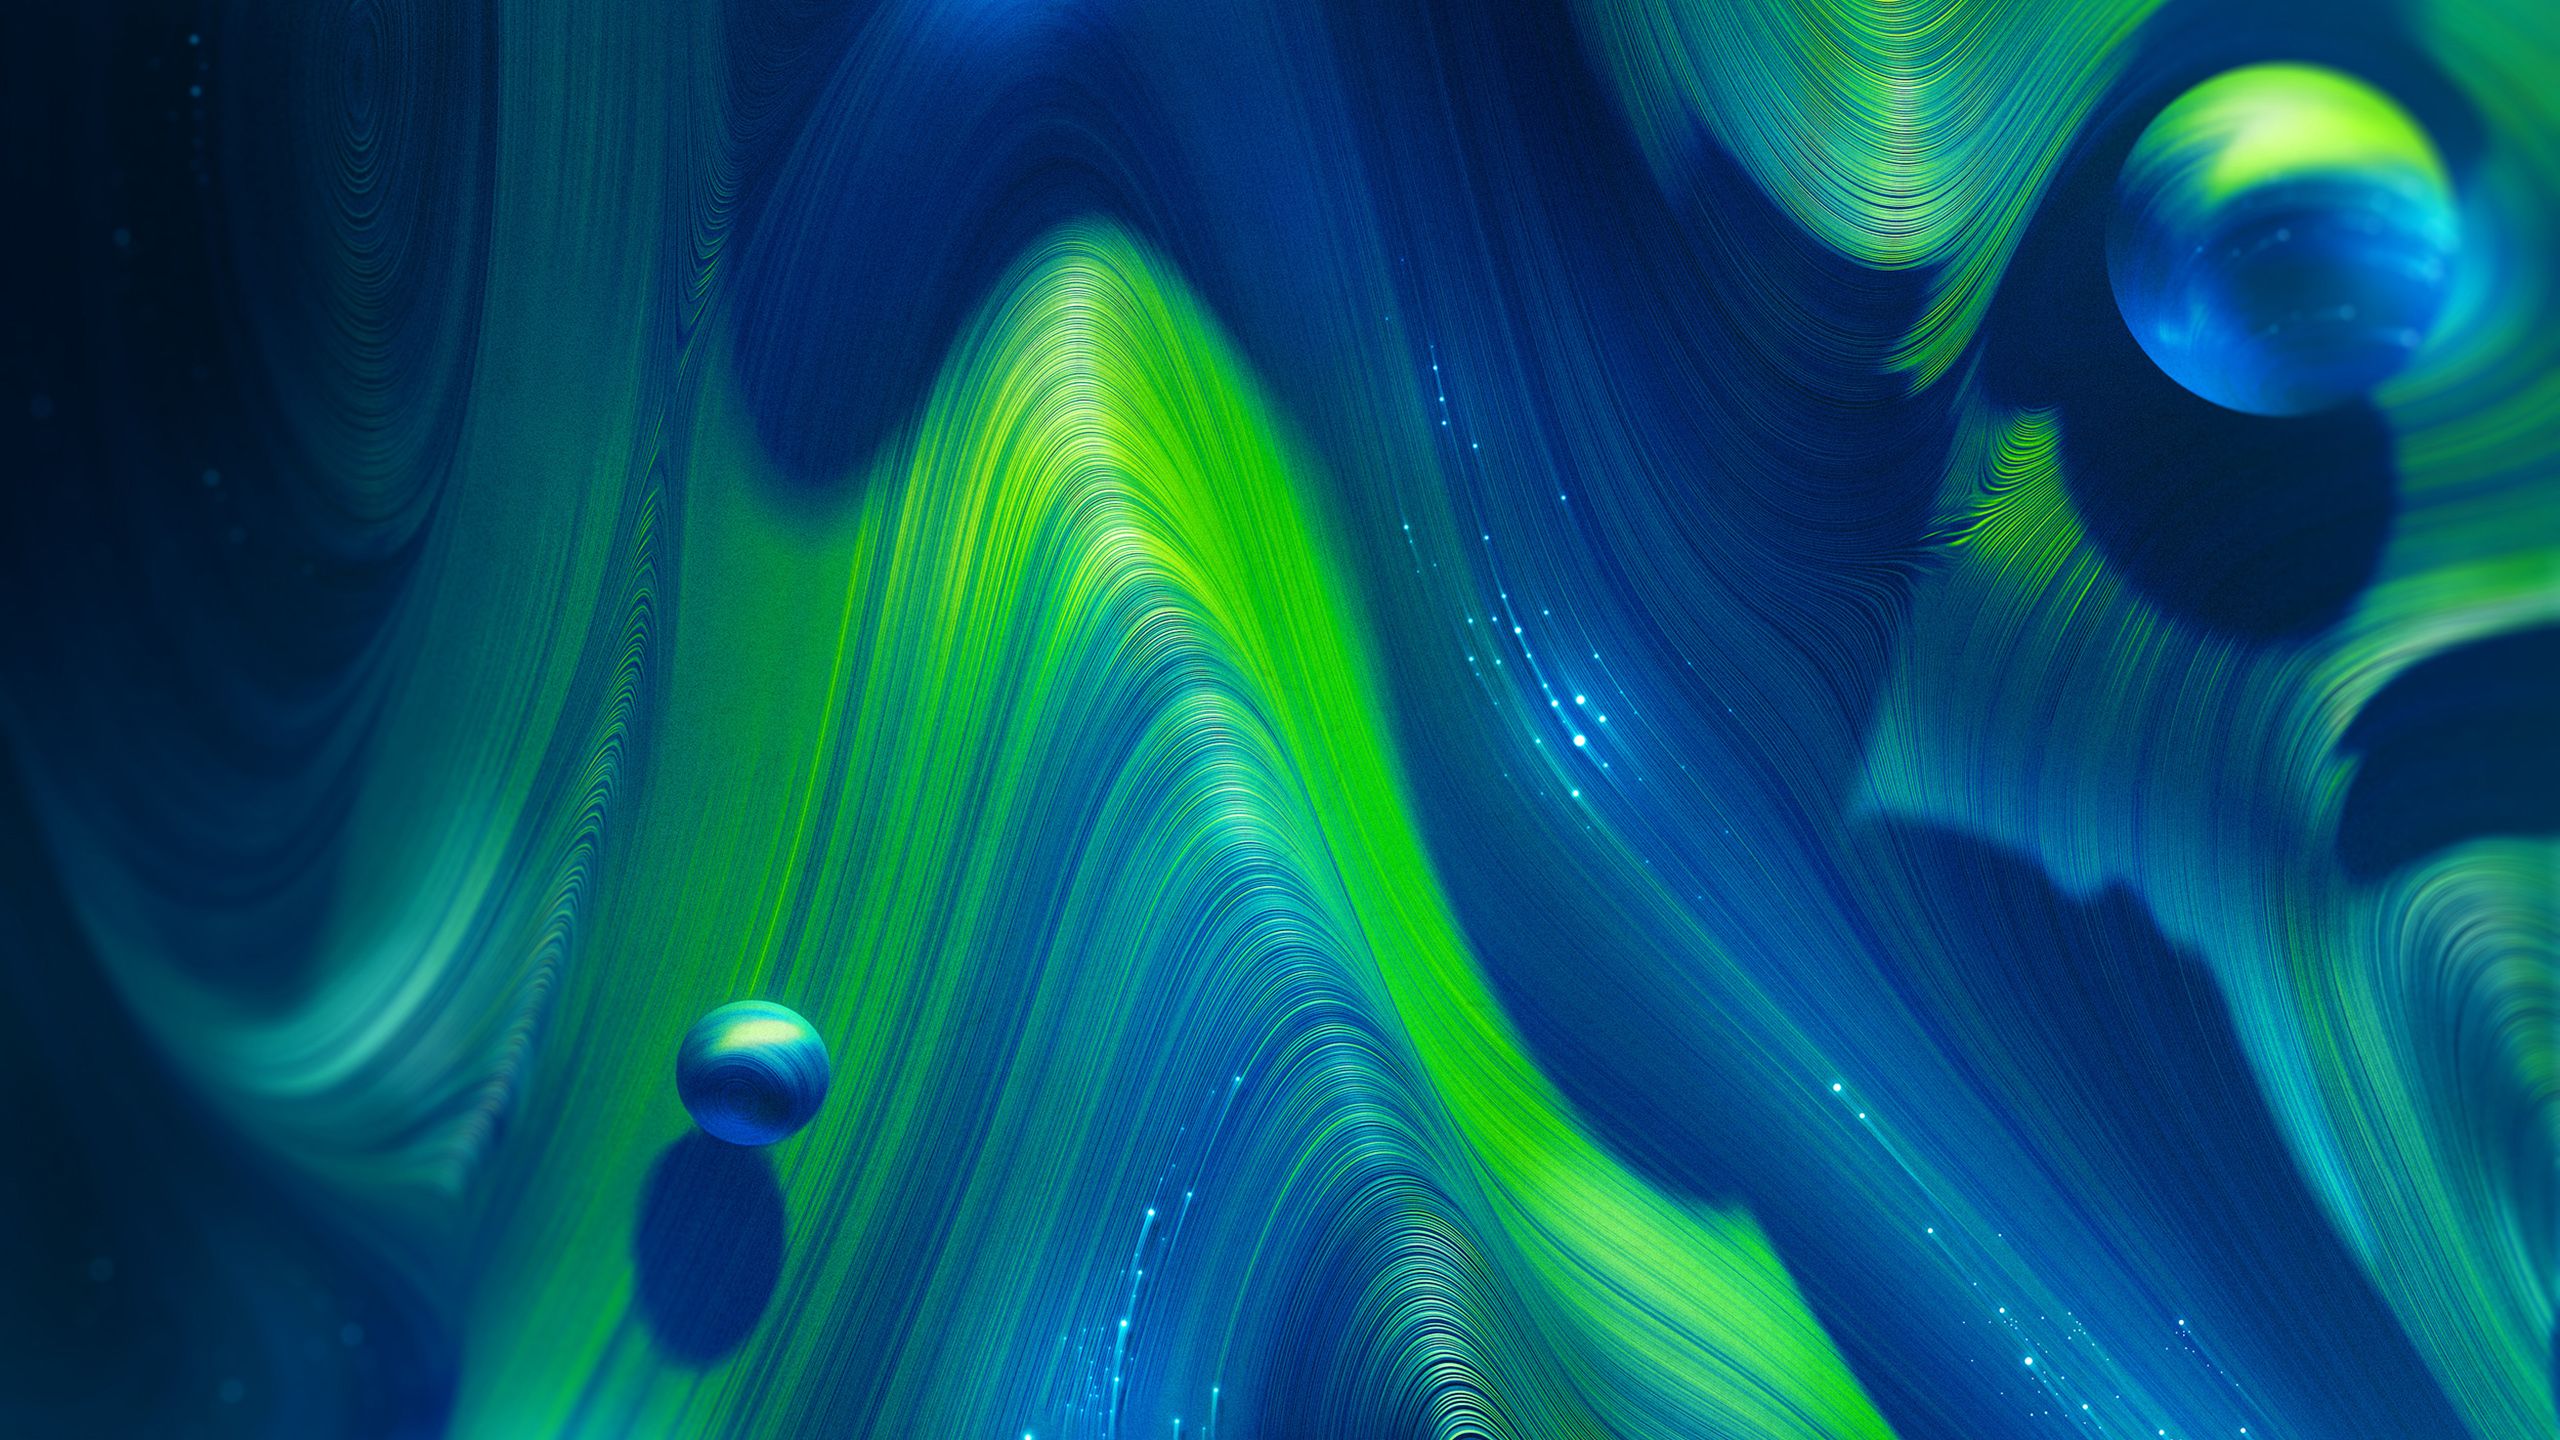 Blue And Green Abstract Wallpapers - Wallpaper Cave